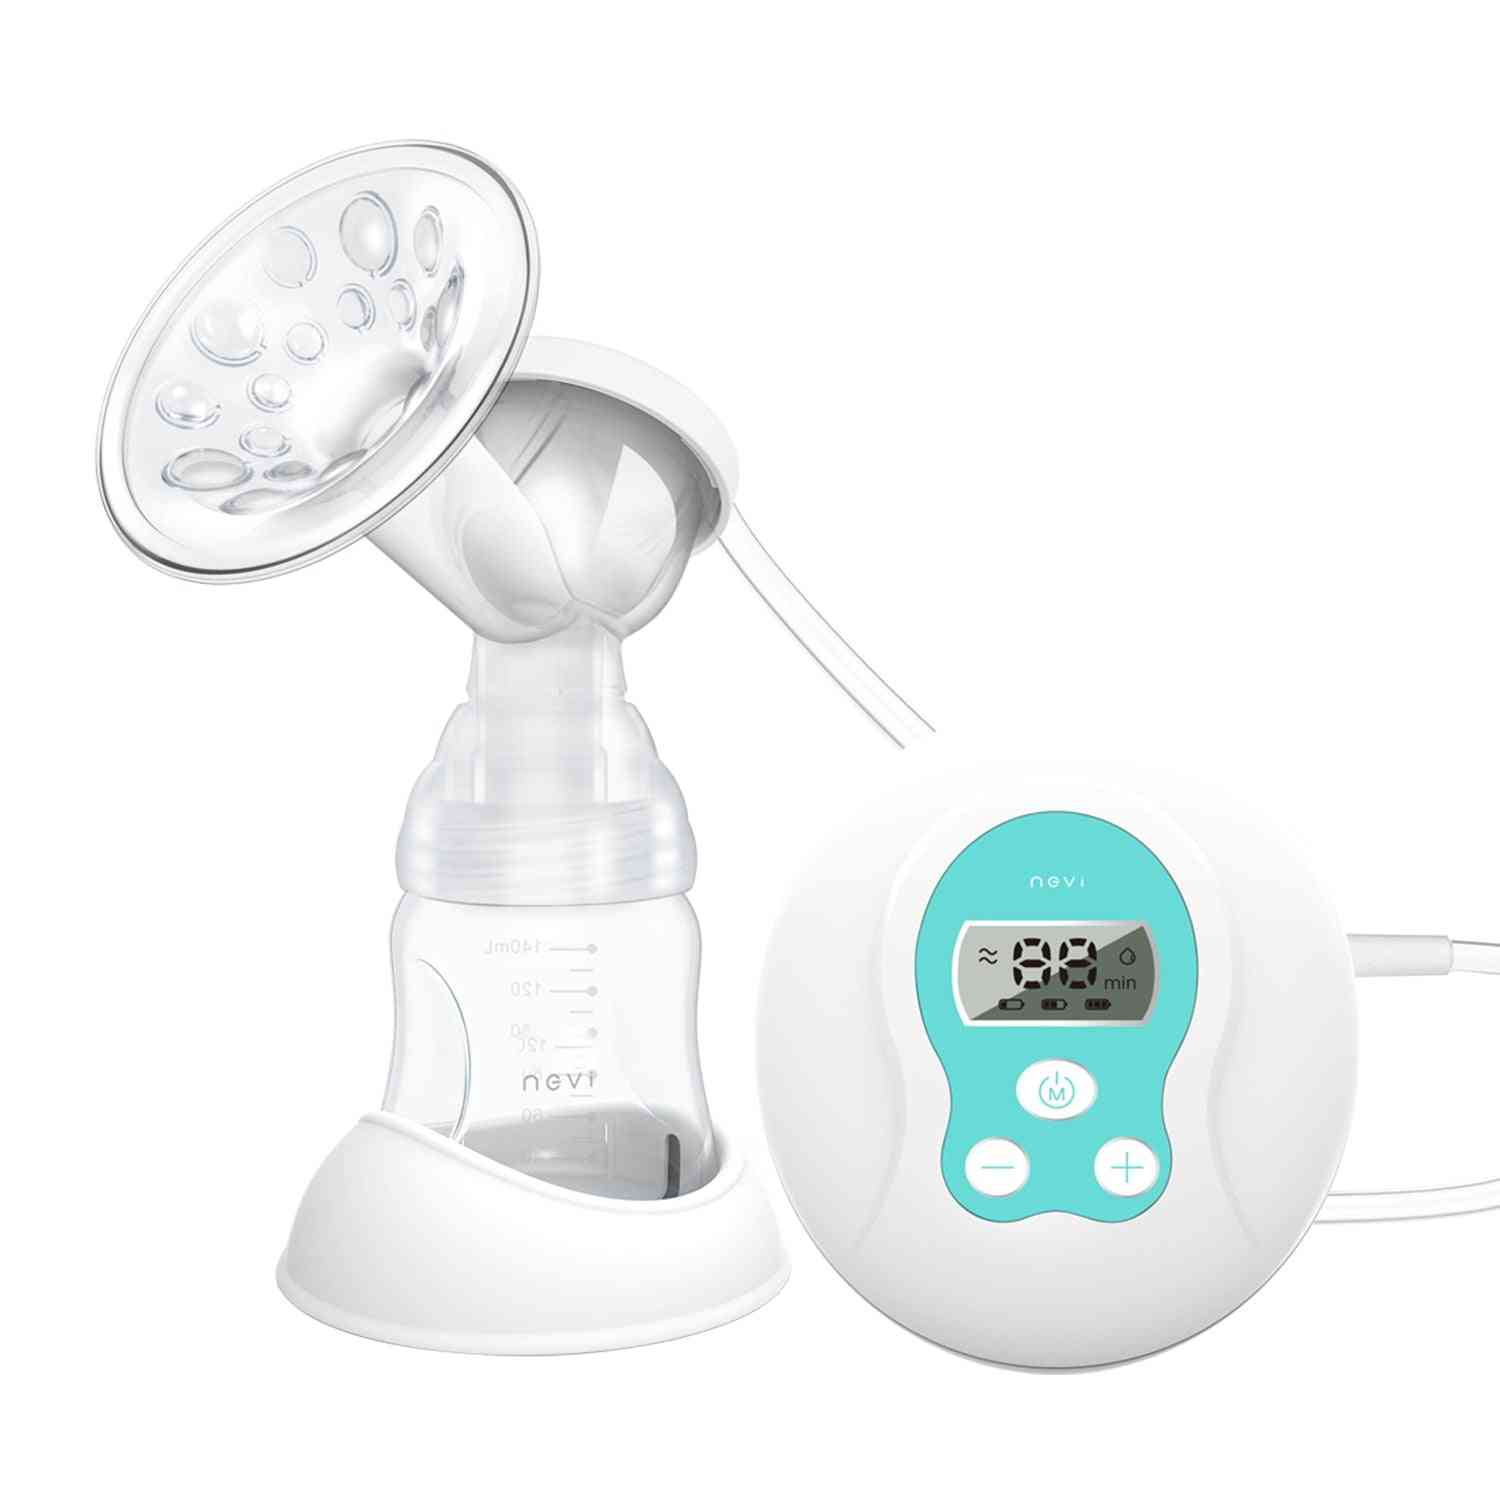 Rechargeable Electric Pain-free Breast Feeding Pump